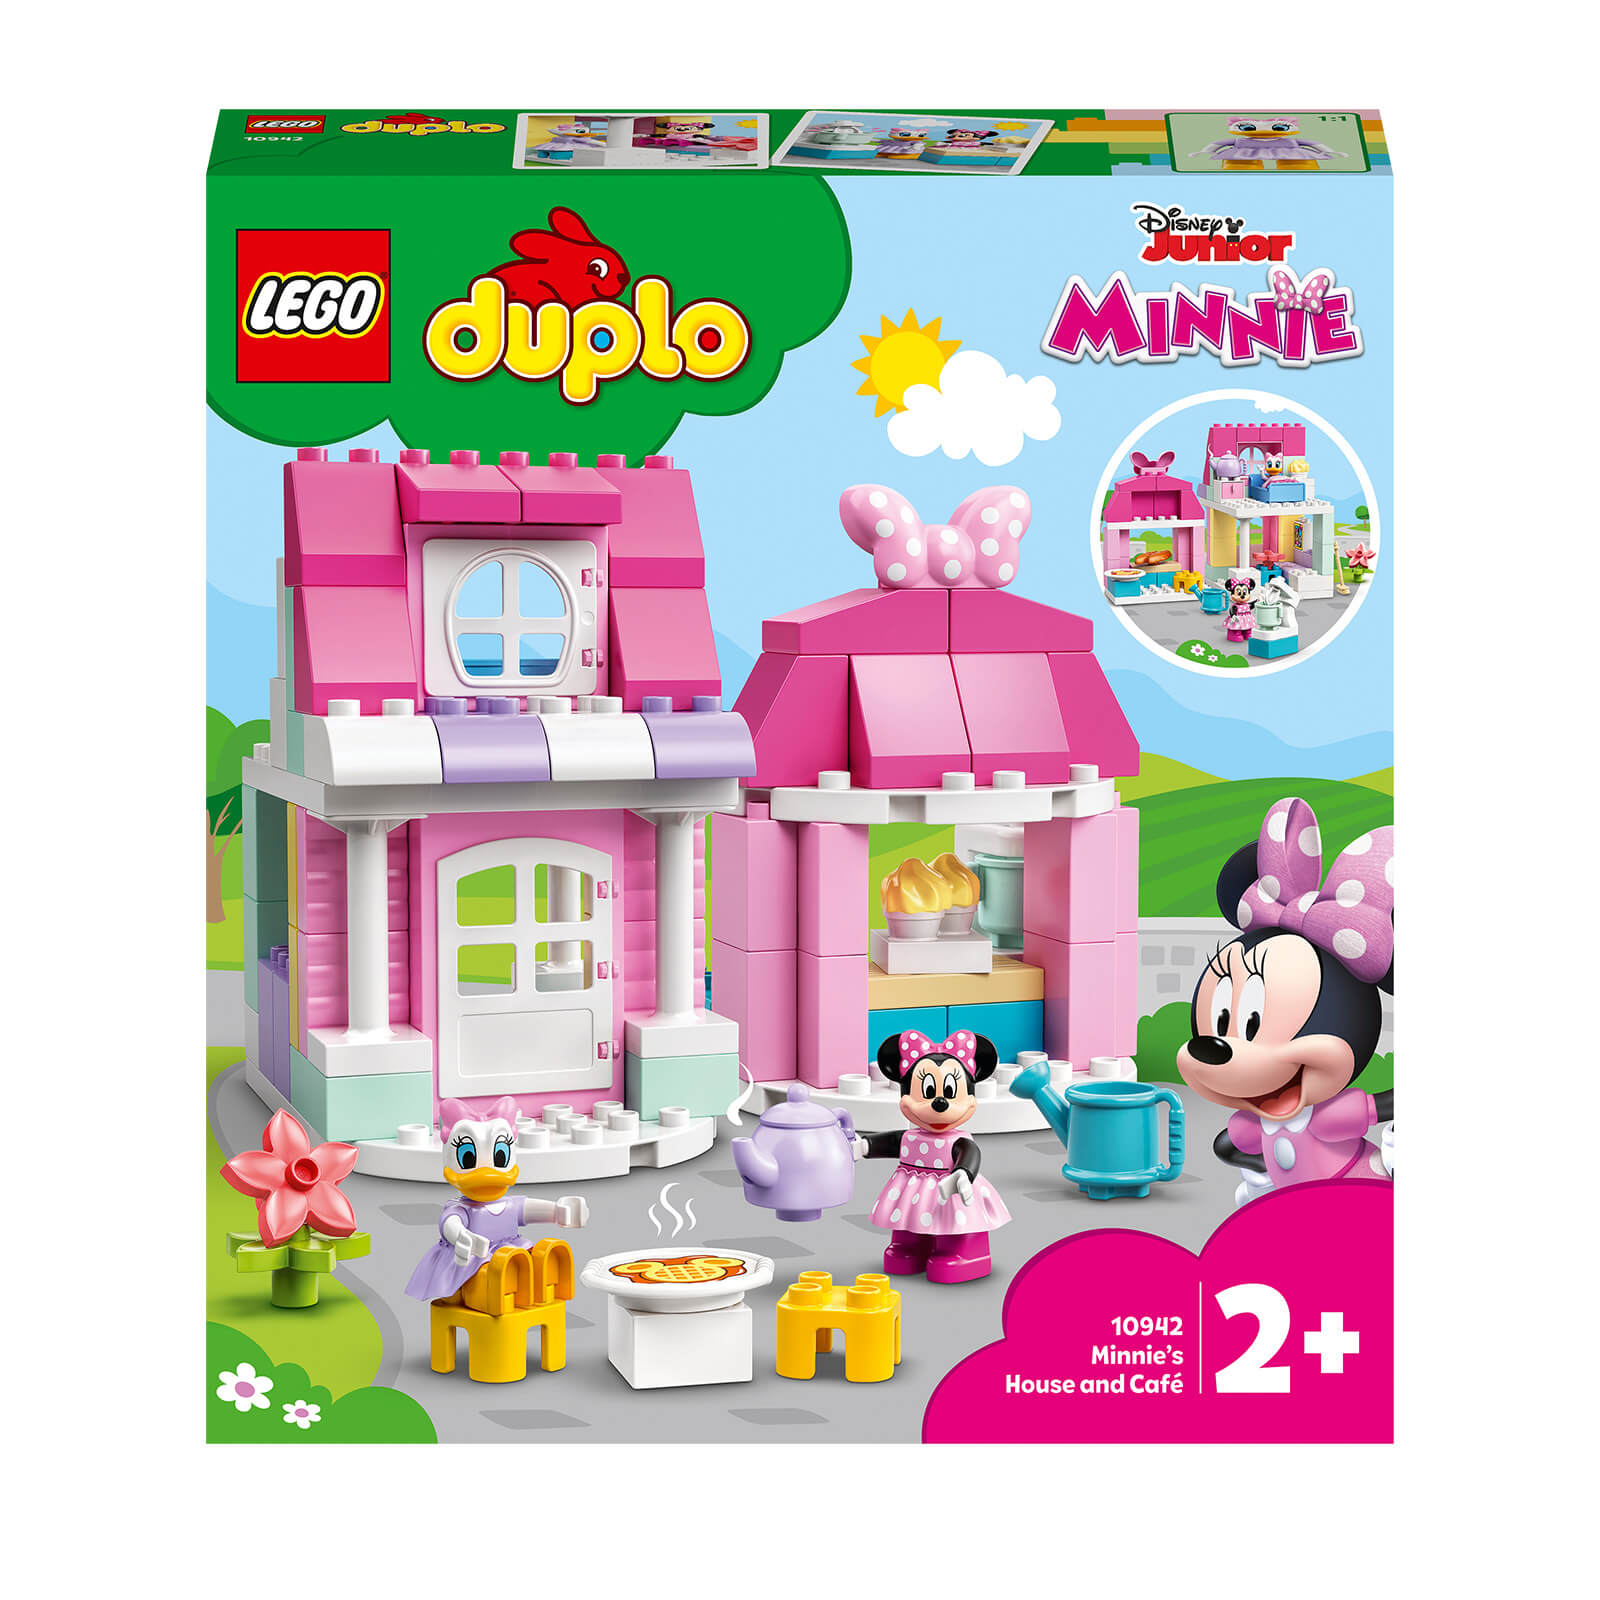 LEGO DUPLO Minnies House and Caf Toy for Toddlers (10942)